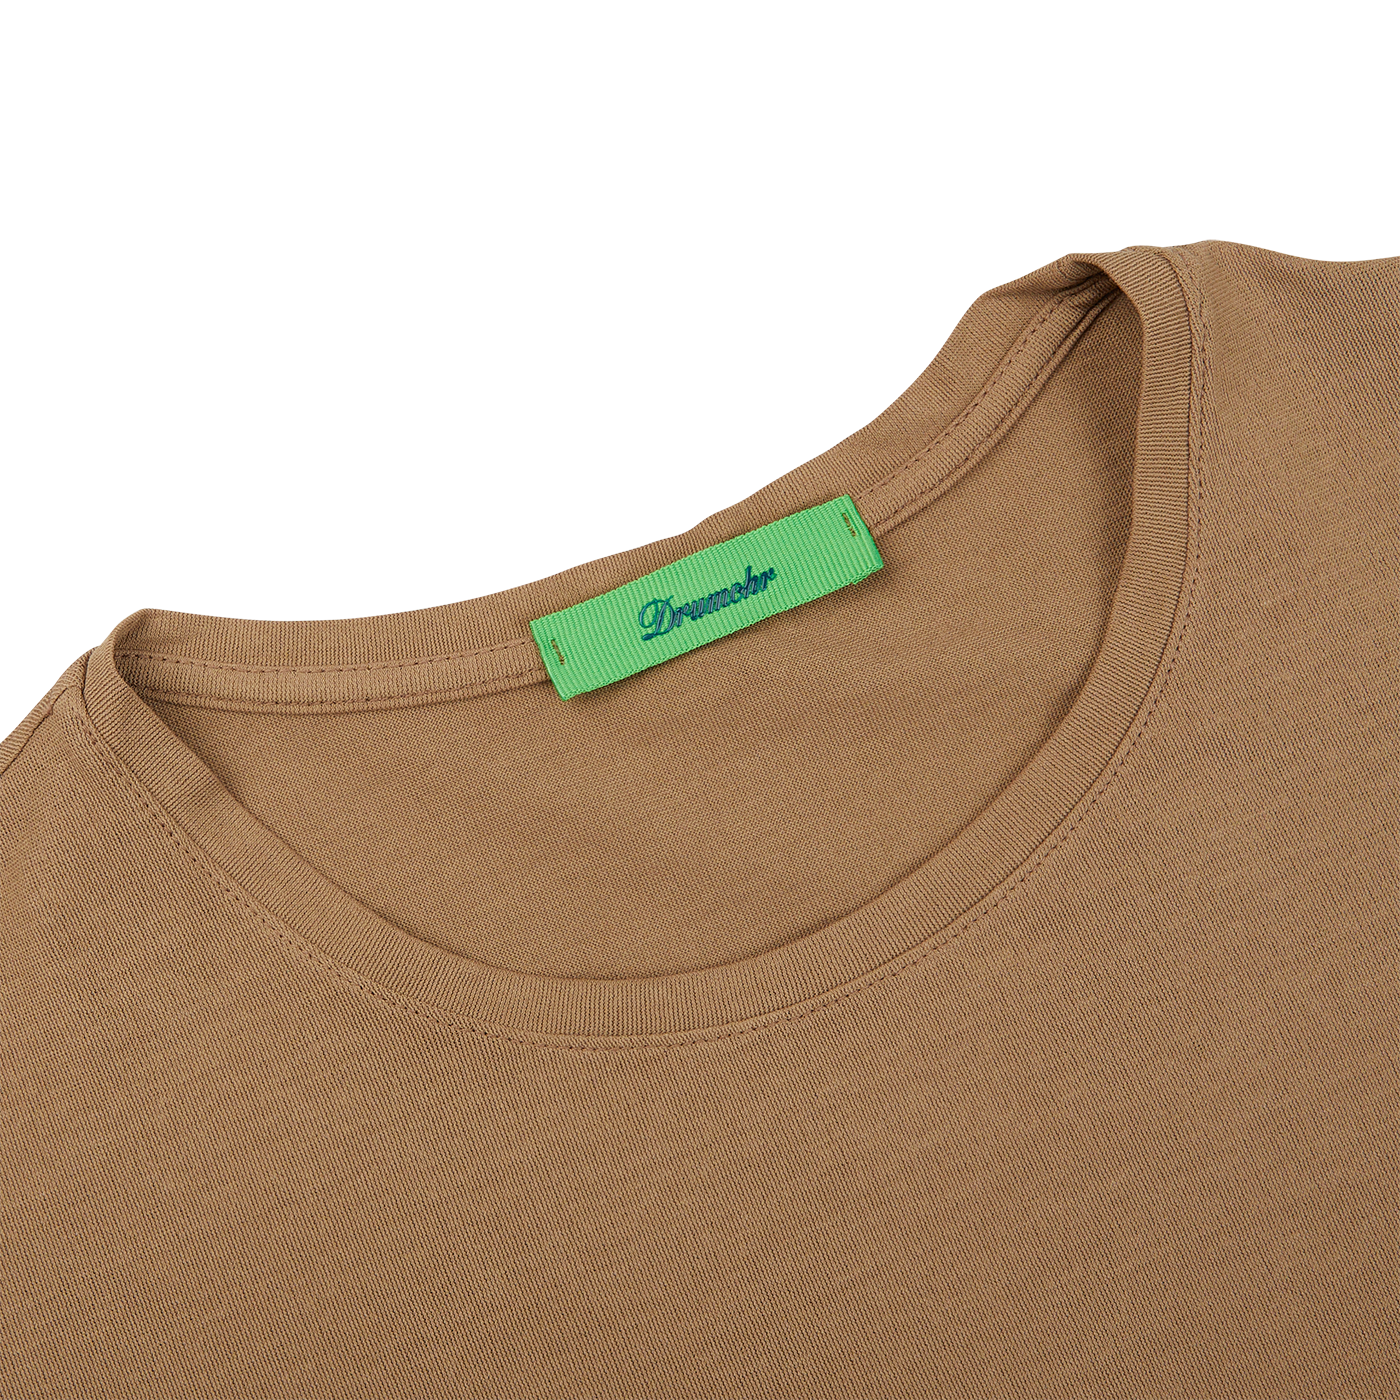 A Coffee Brown Ice Cotton LS T-Shirt with a green label by Drumohr.